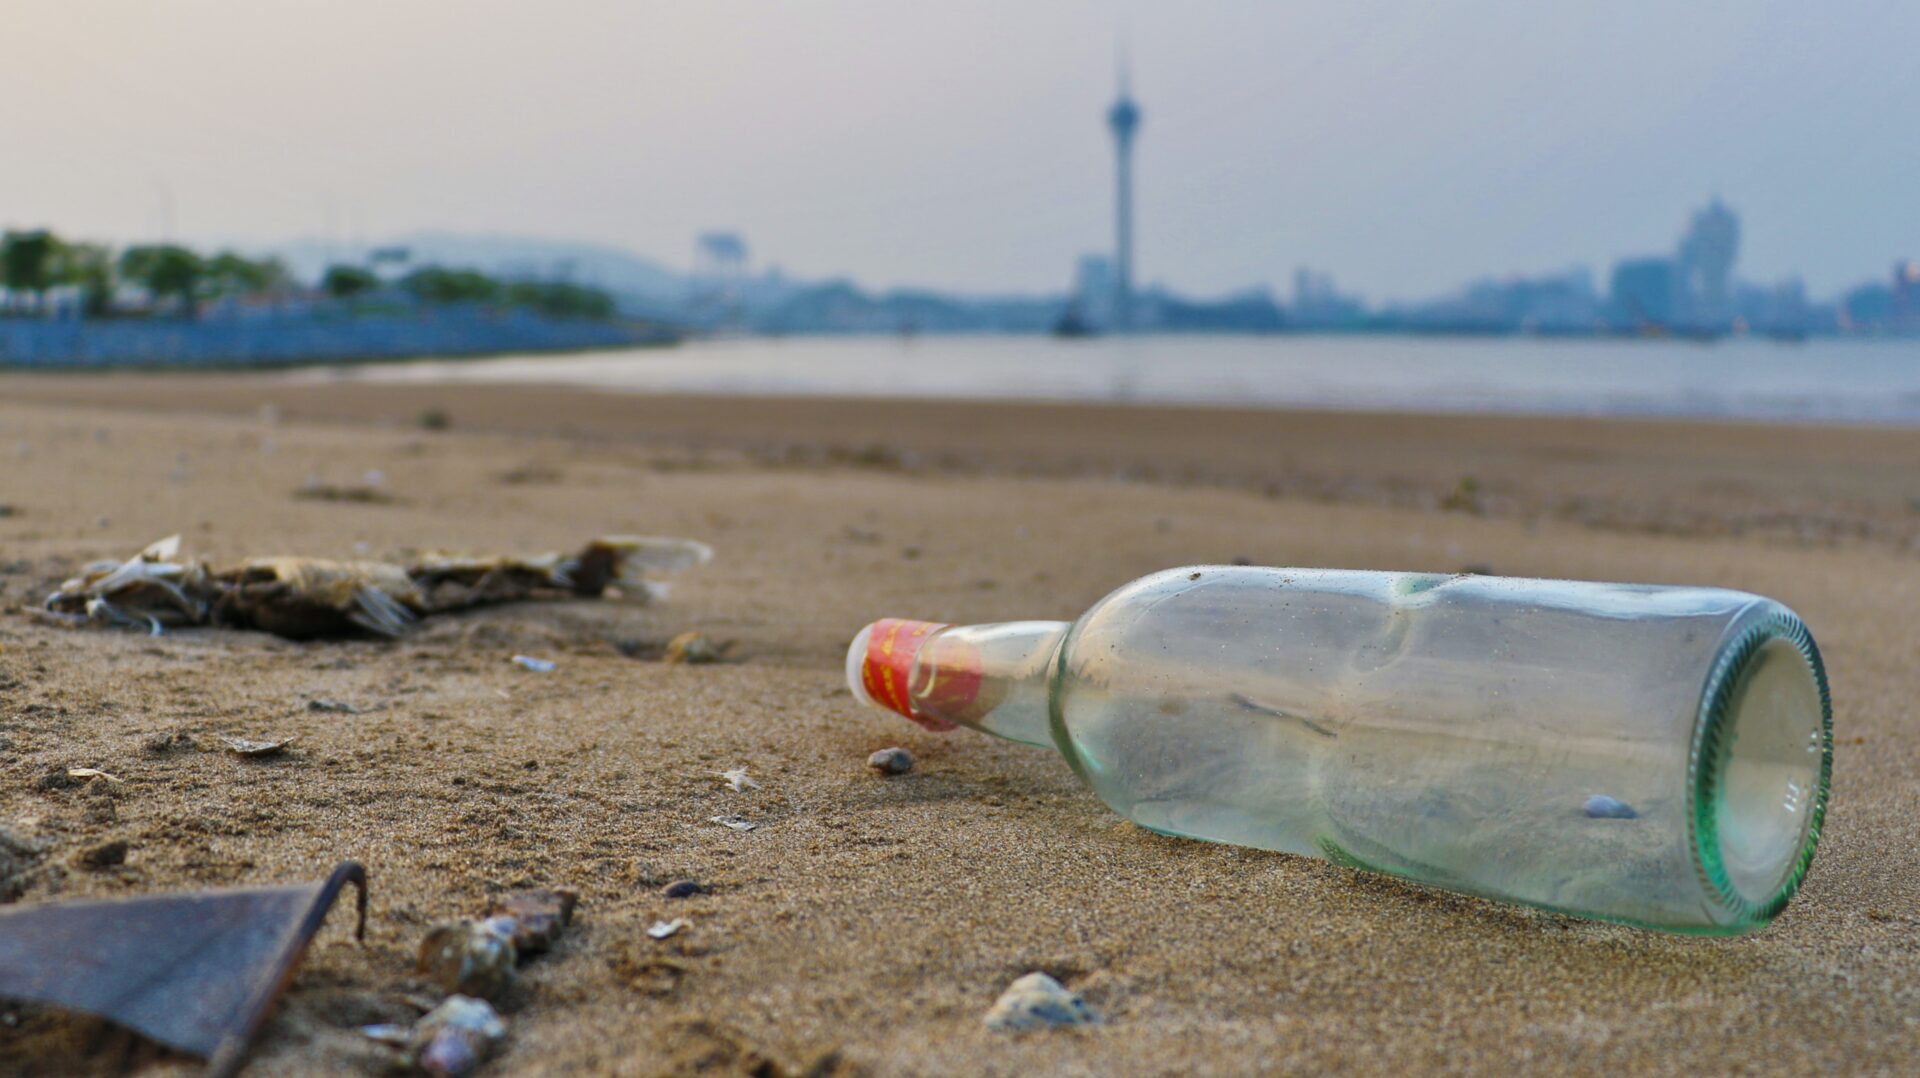 11 Easy Ways to Reduce Your Plastic Waste Today